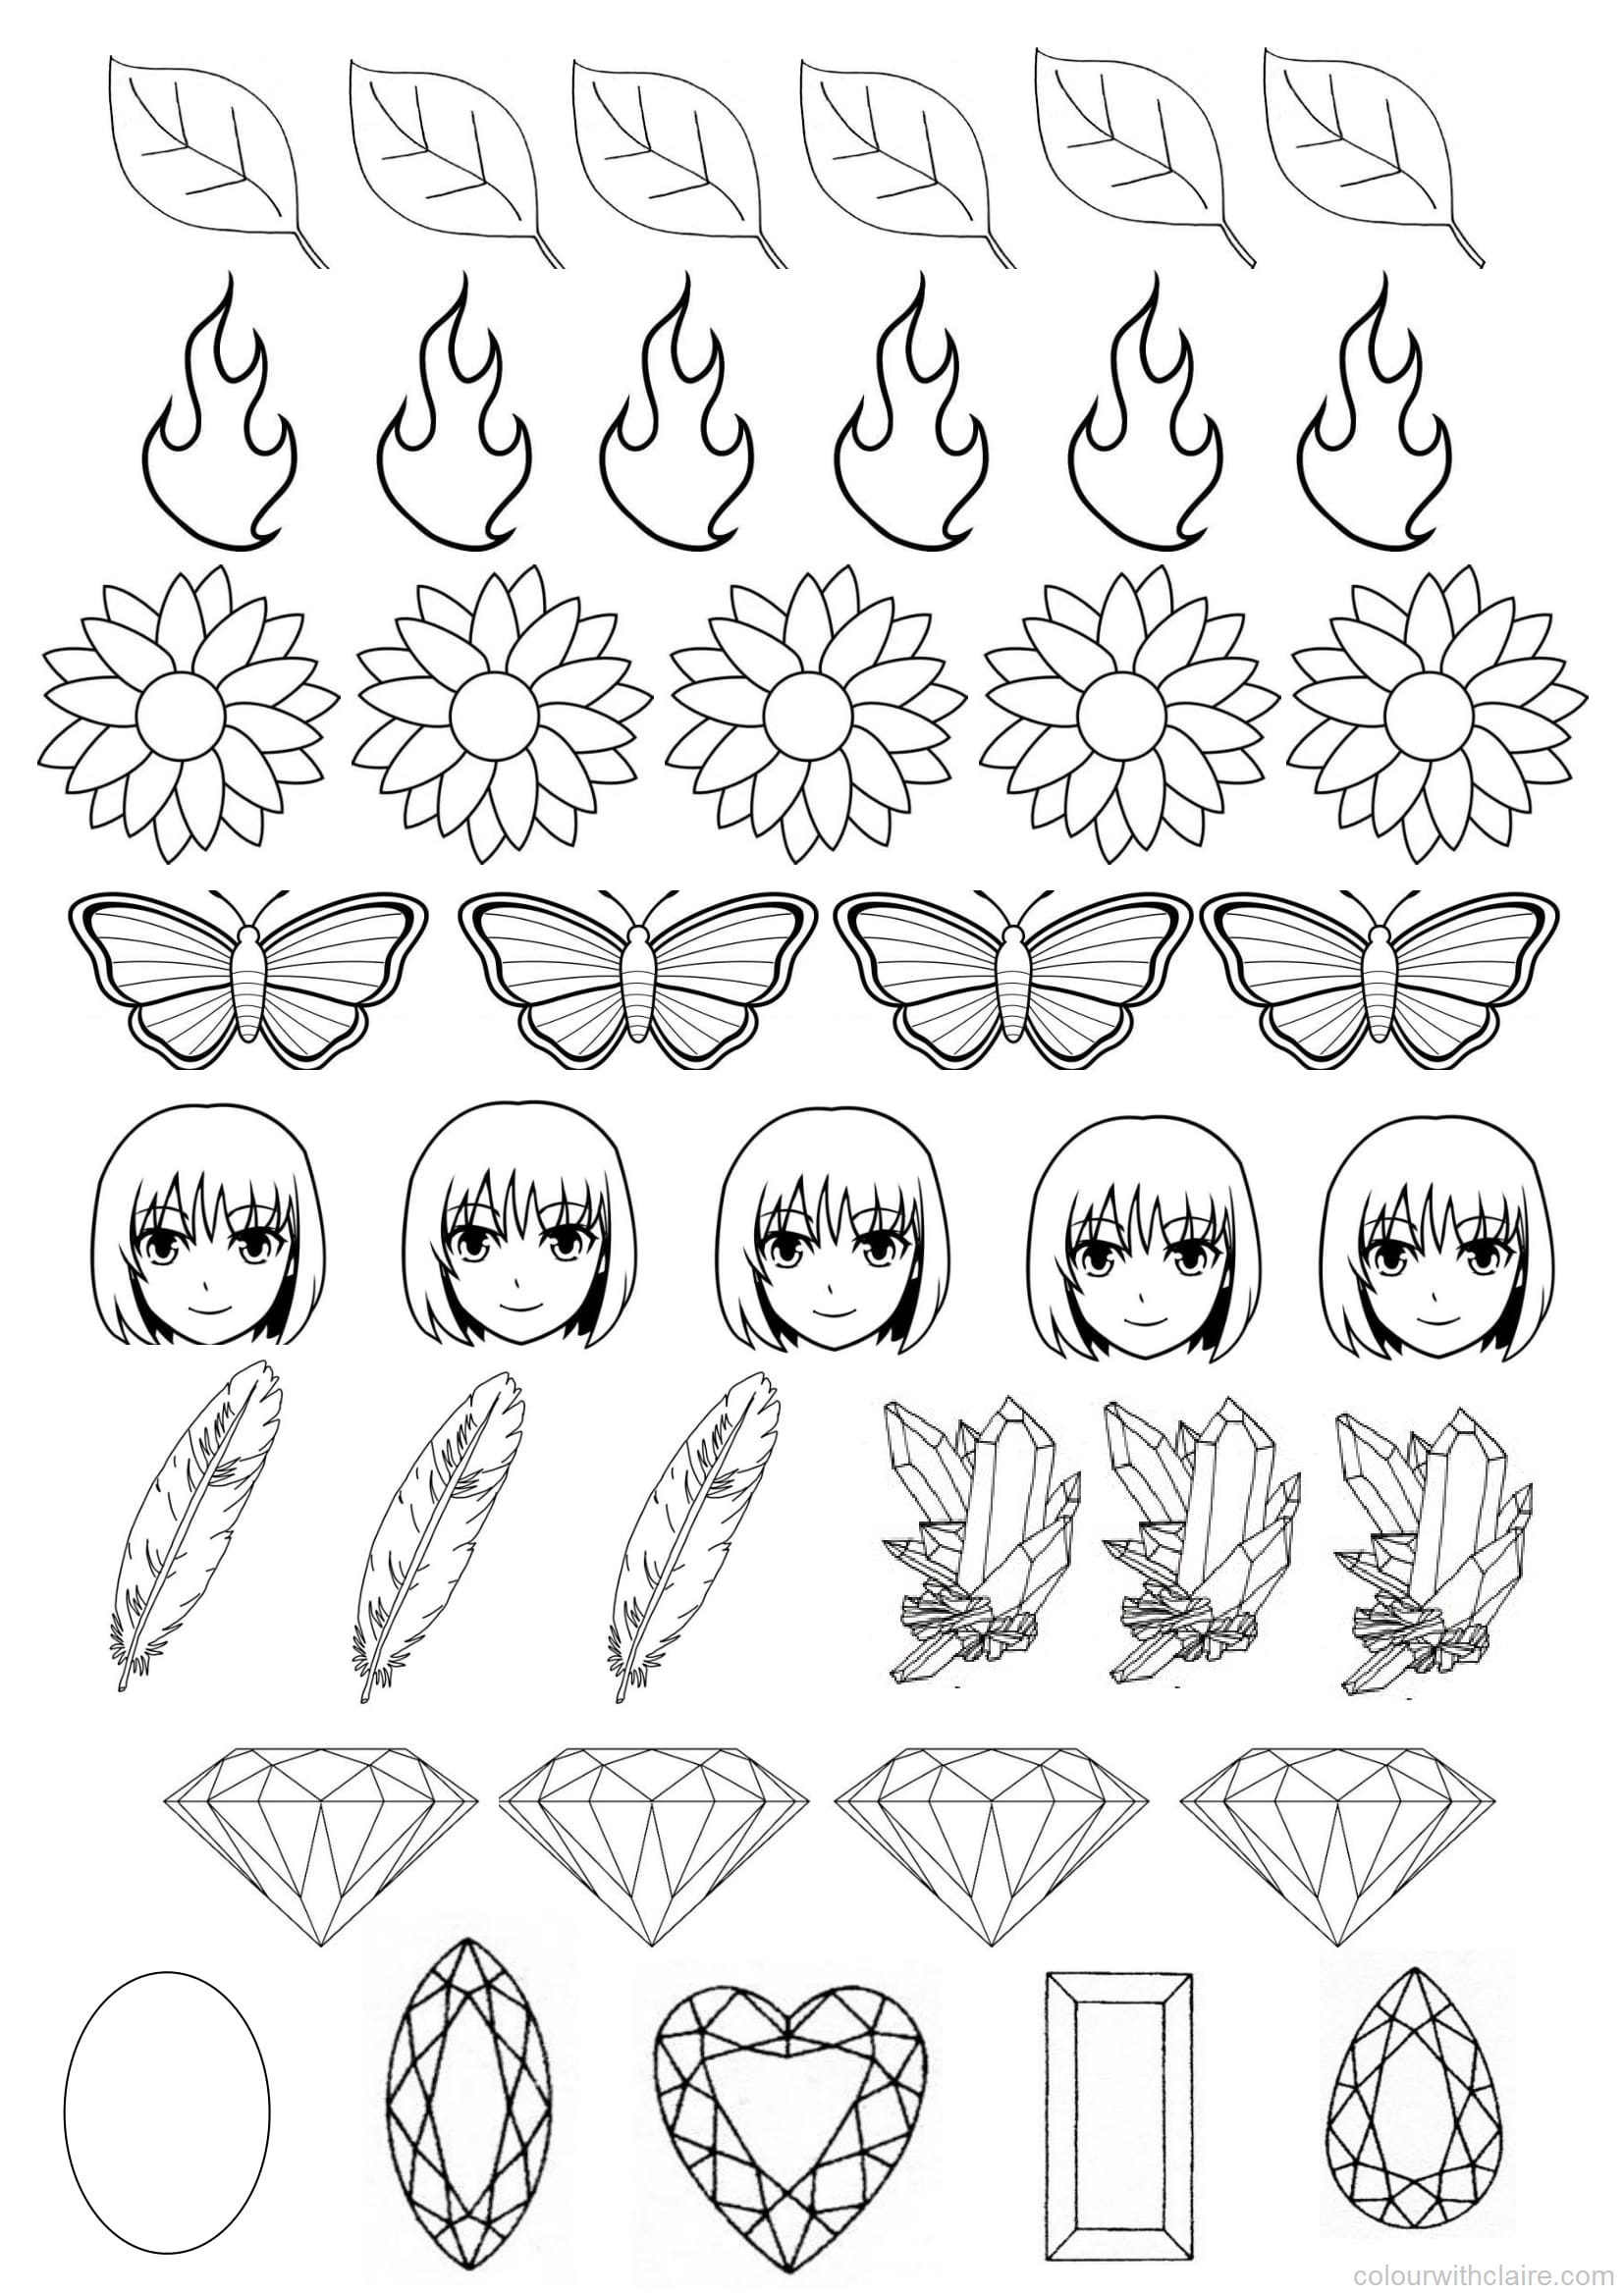 blending-practice-sheet-free-download-colour-with-claire